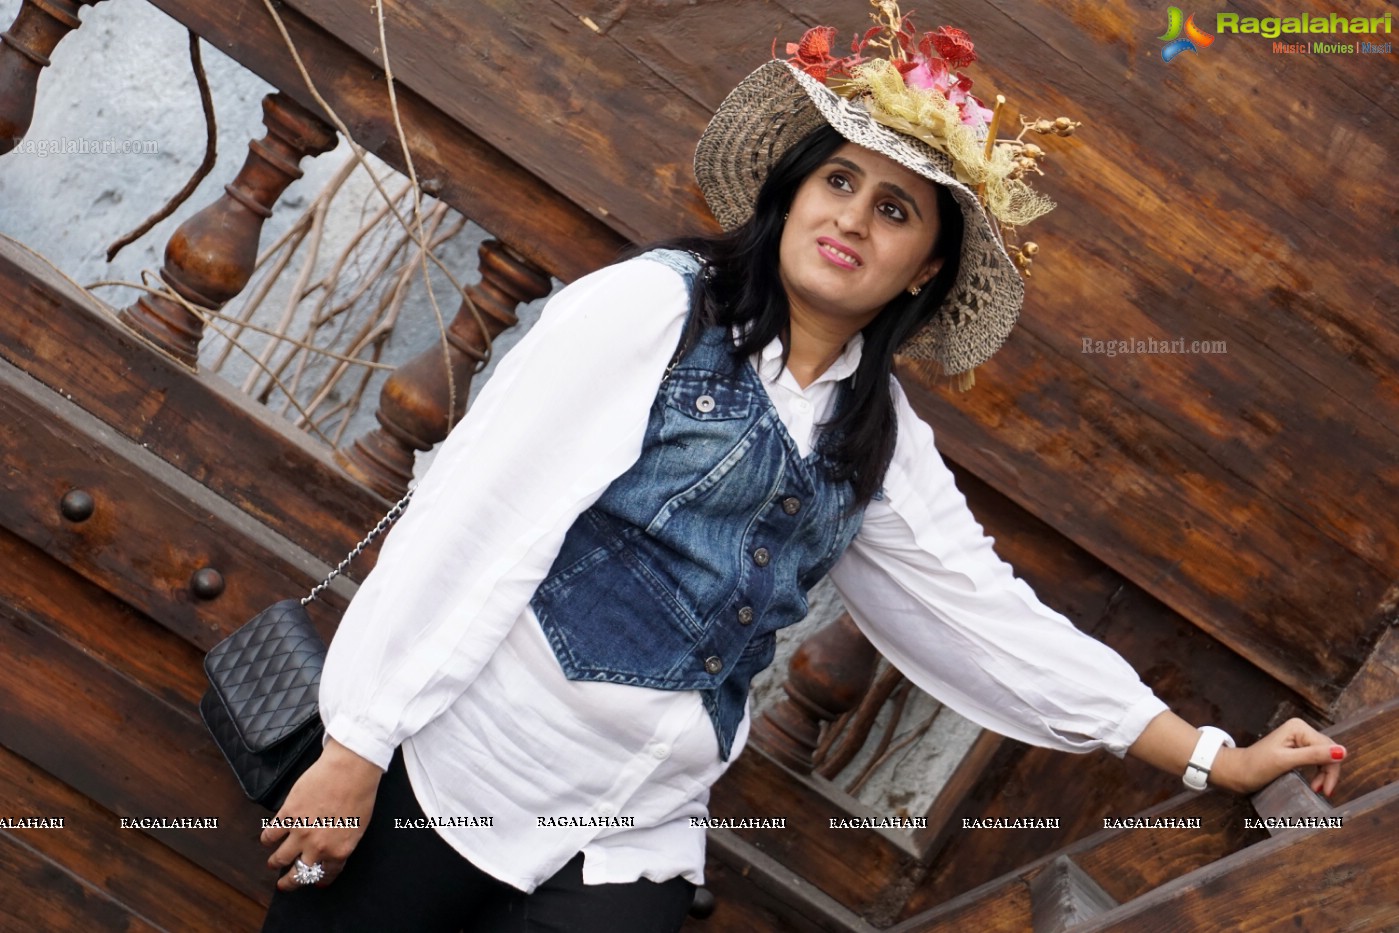 The Lady Pirates Theme Event by Femmis at Pirates Brew, Hyderabad